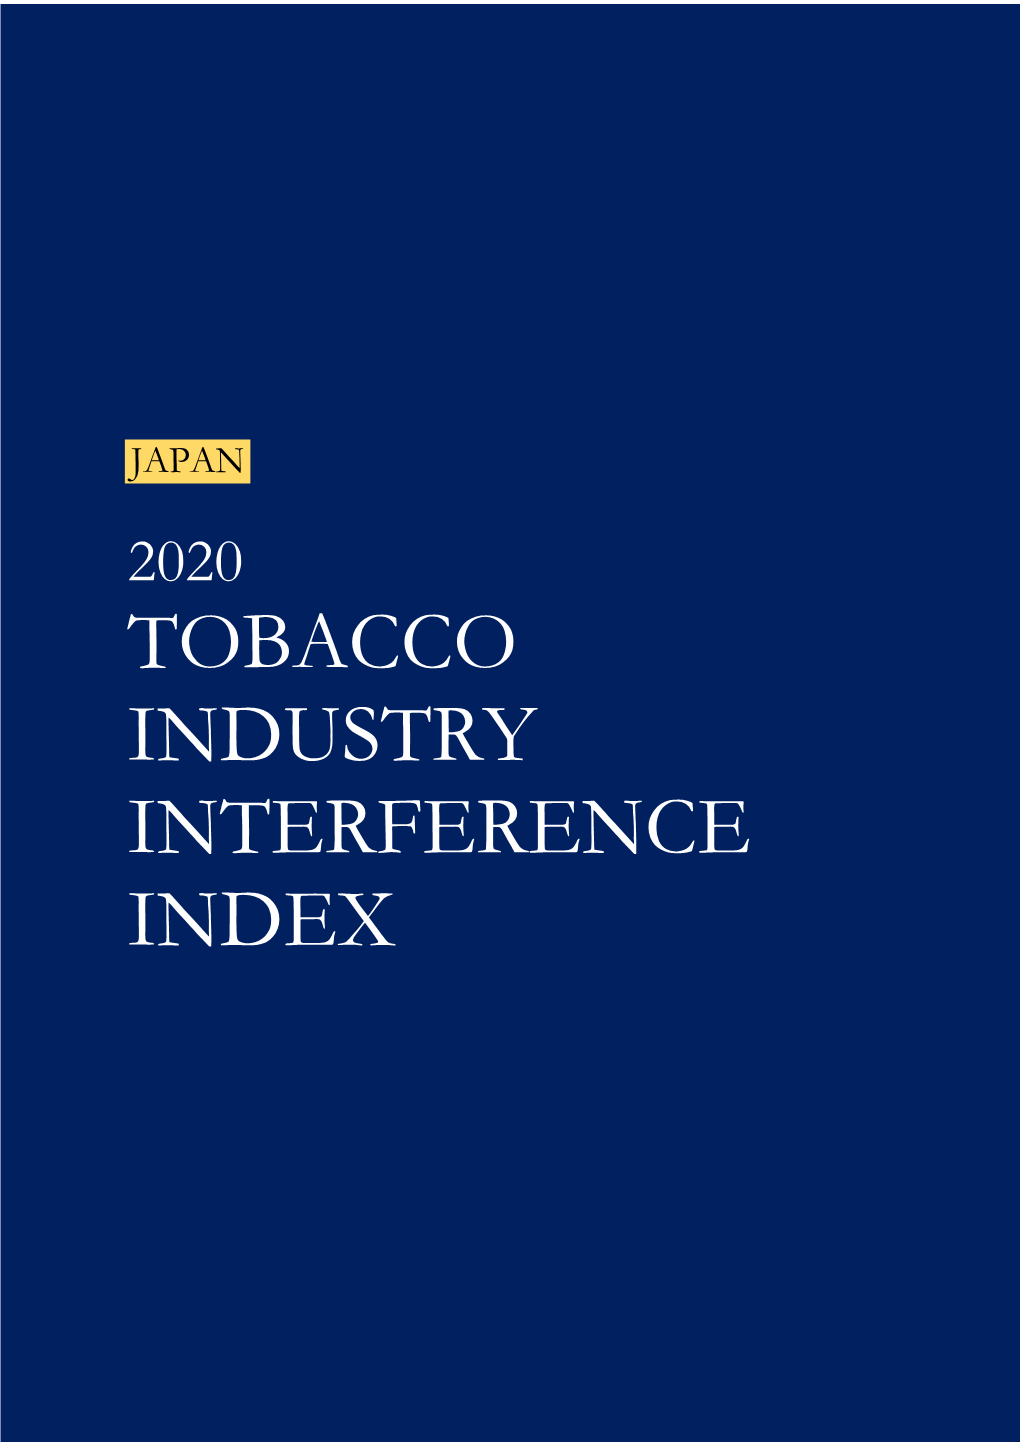 Japan 2020 Tobacco Industry Interference Index